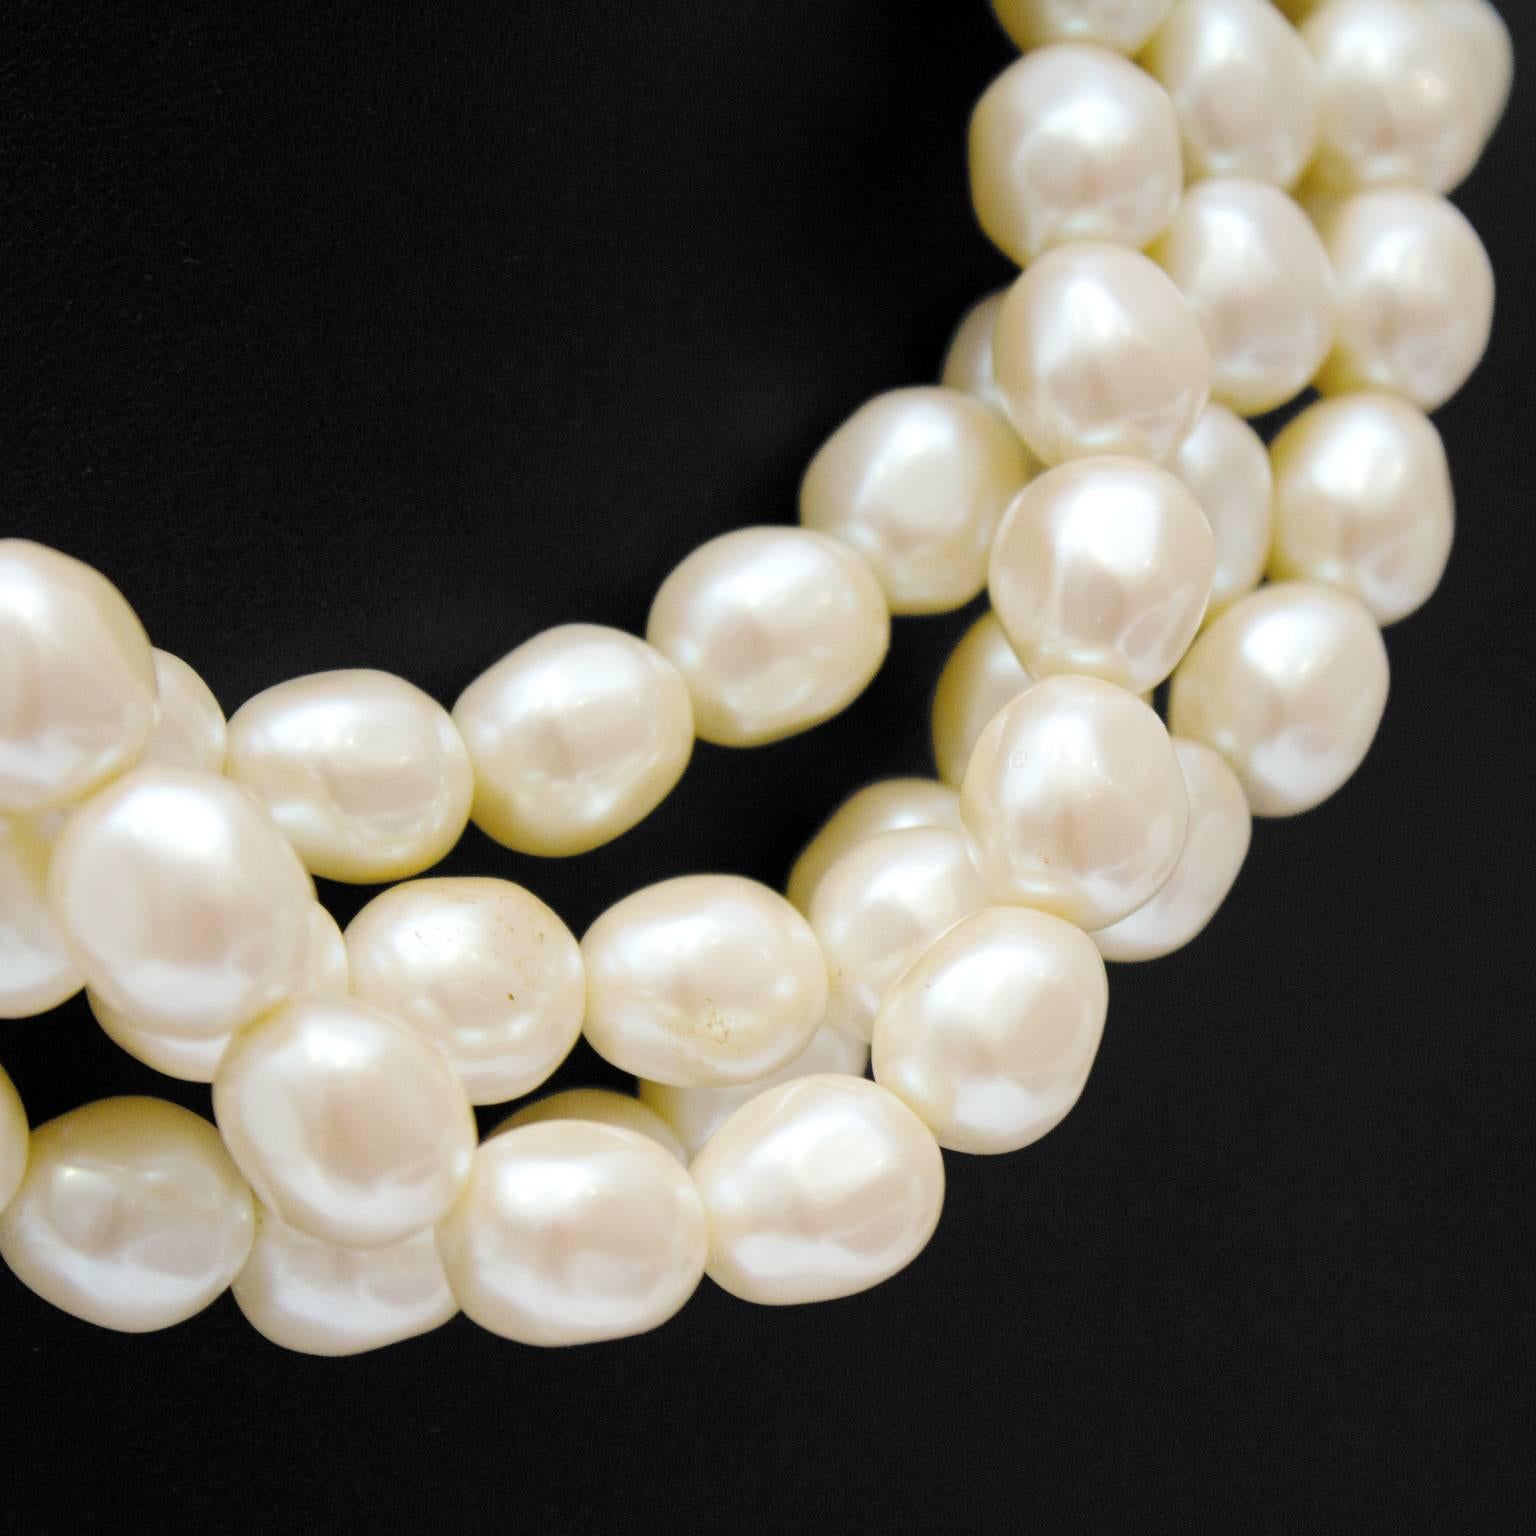 1980's YSL four-strand faux pearl necklace. This statement piece fastens with an art-deco inspired clasp that lies flat and is adorned with a large pearl cabochon. Excellent condition. Meant to worn twisted or casually draped, clasp front or